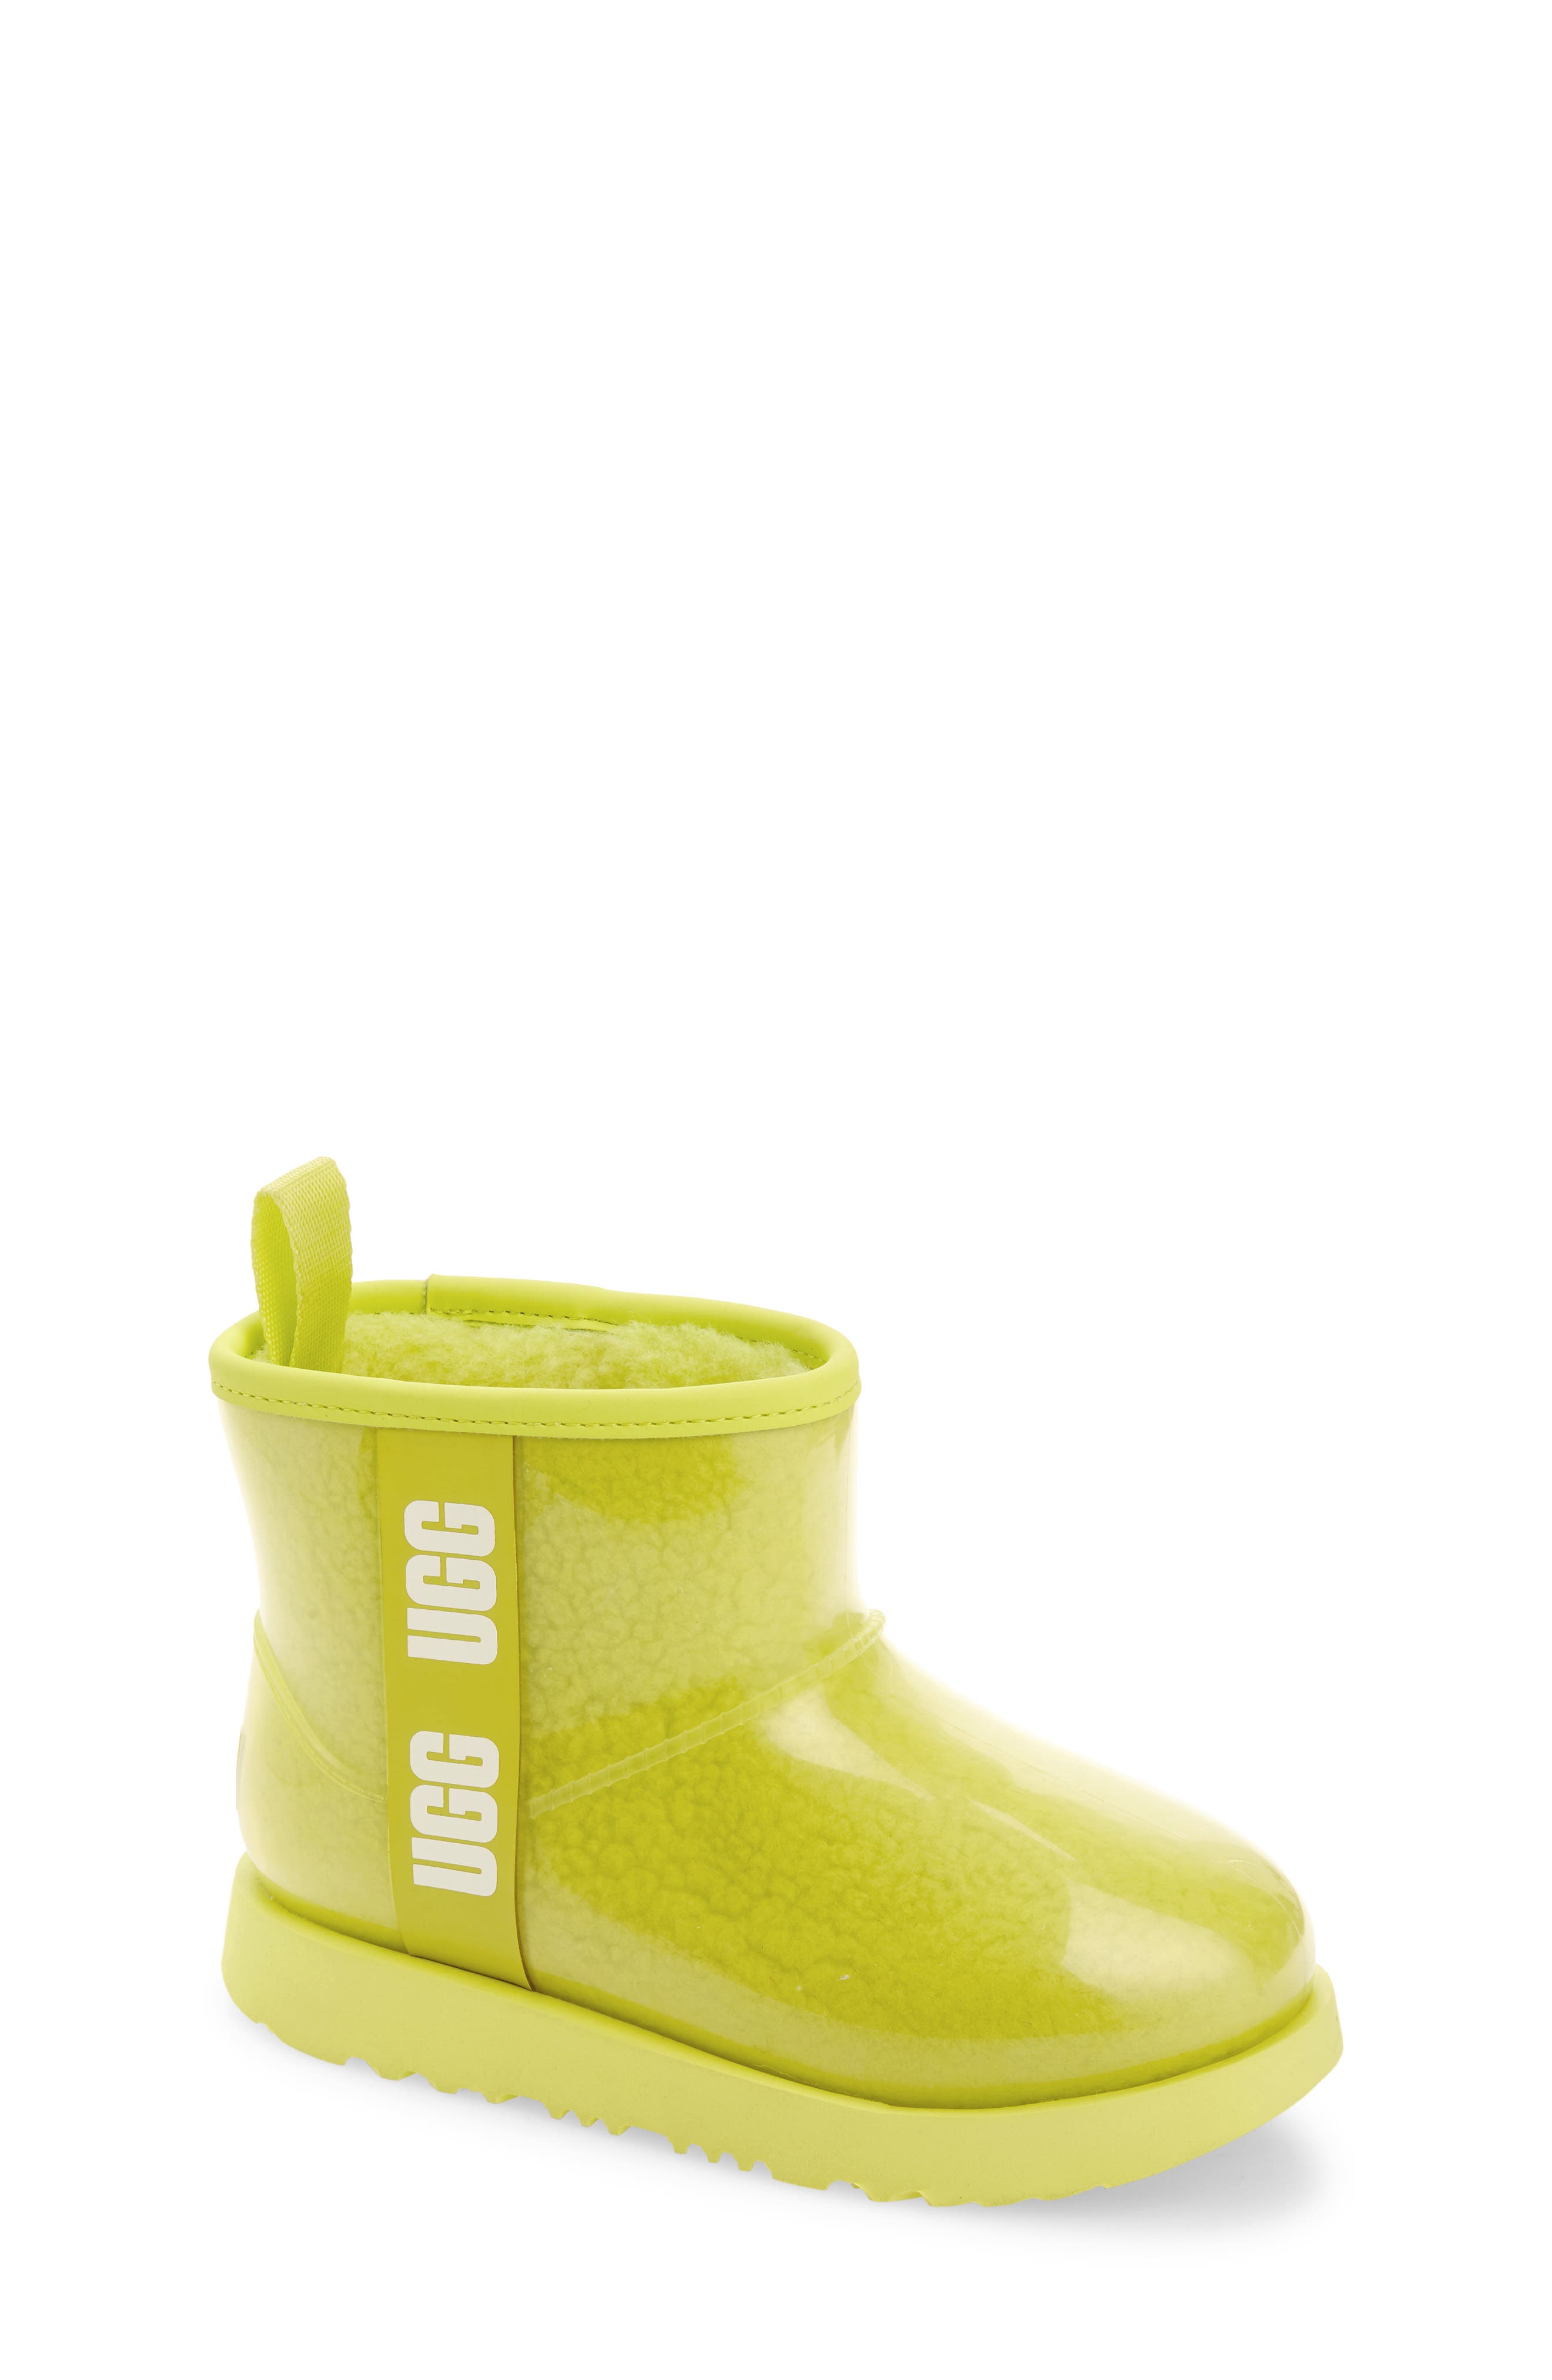 yellow low top uggs